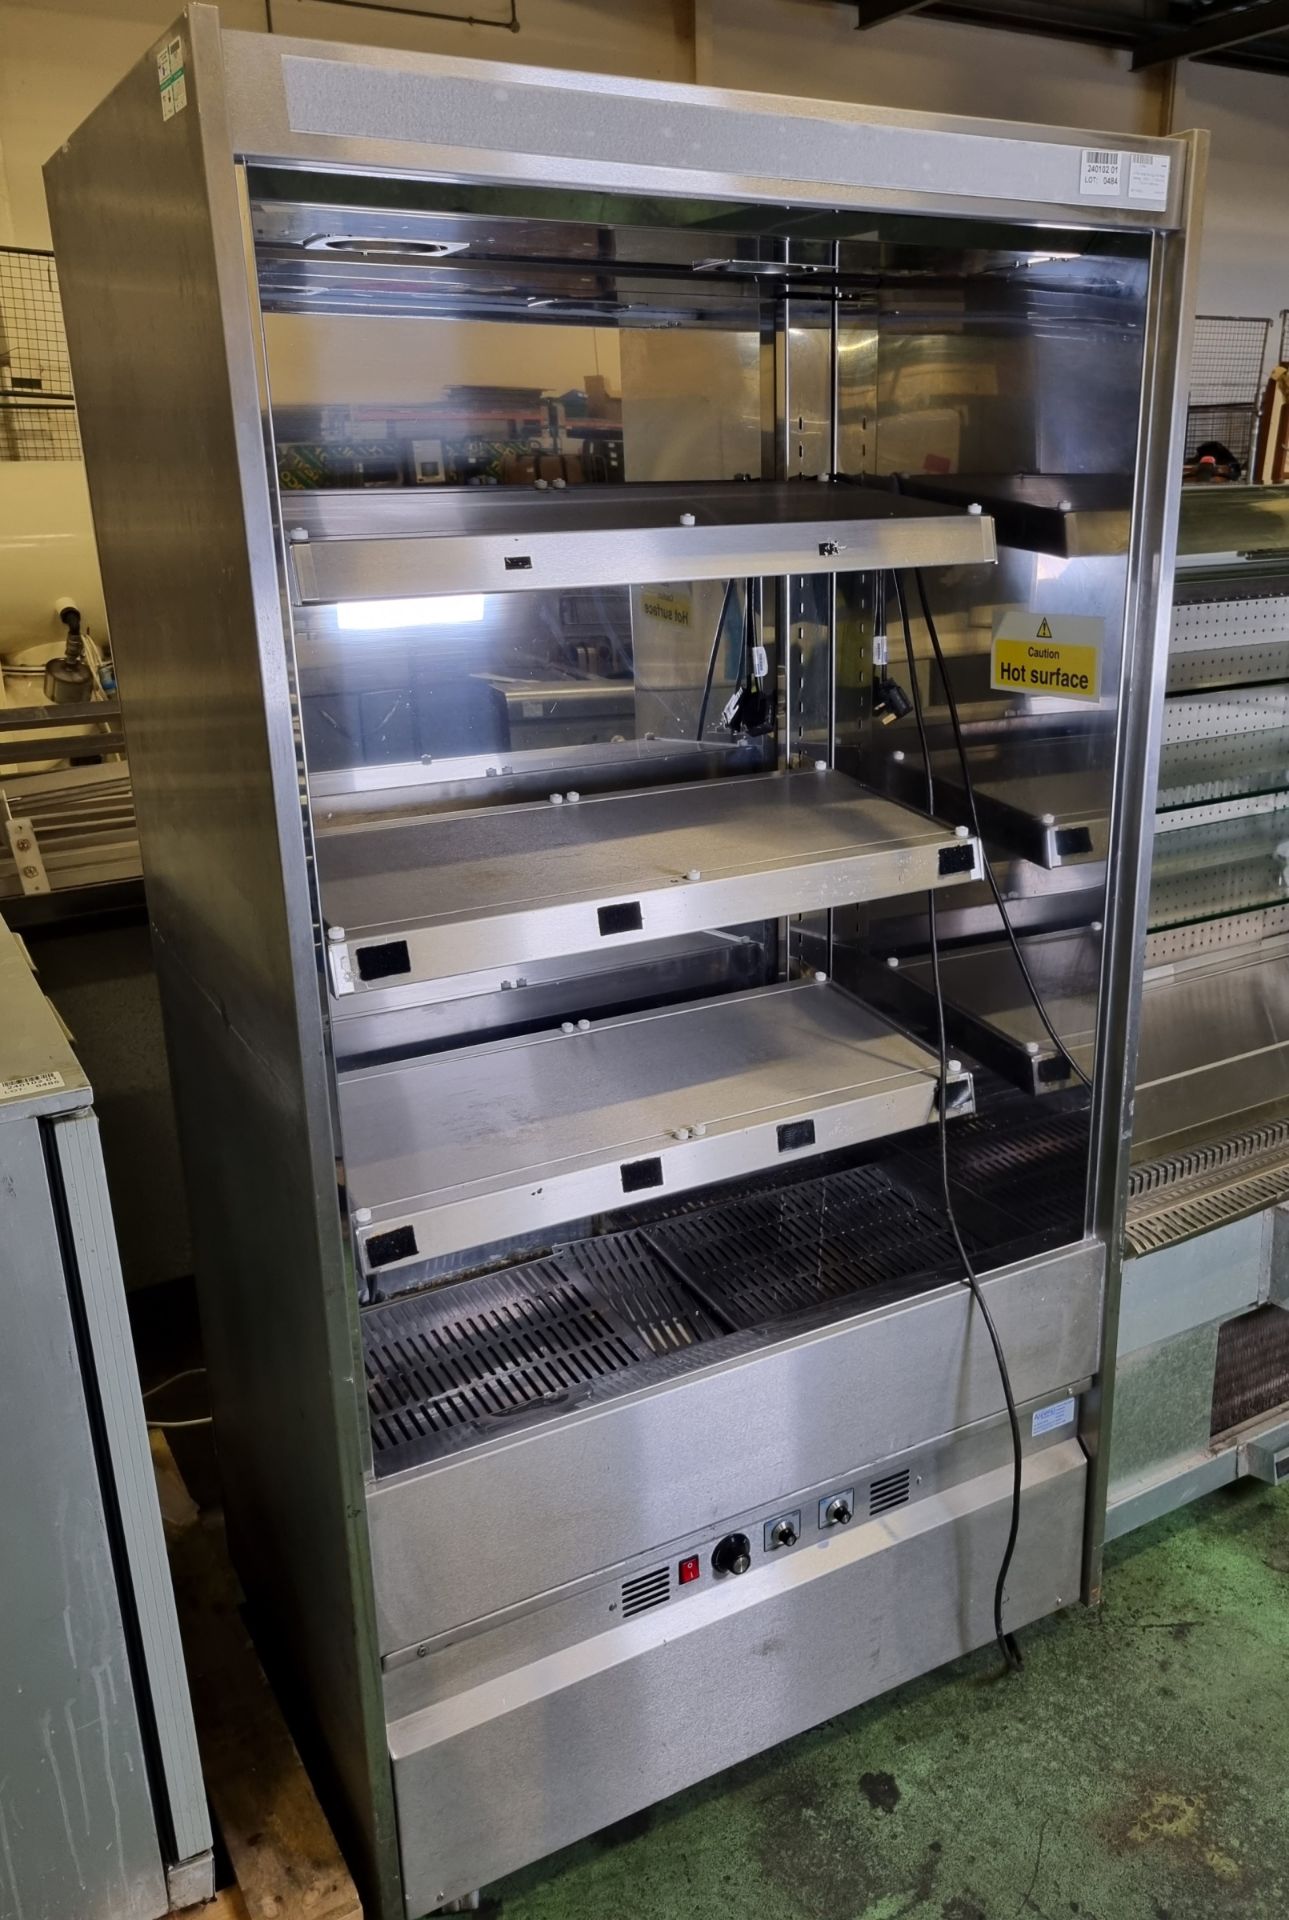 4 Tier Grab and go hot food display - 250V - L 1000 x W 720 x H 1860mm - Image 2 of 3